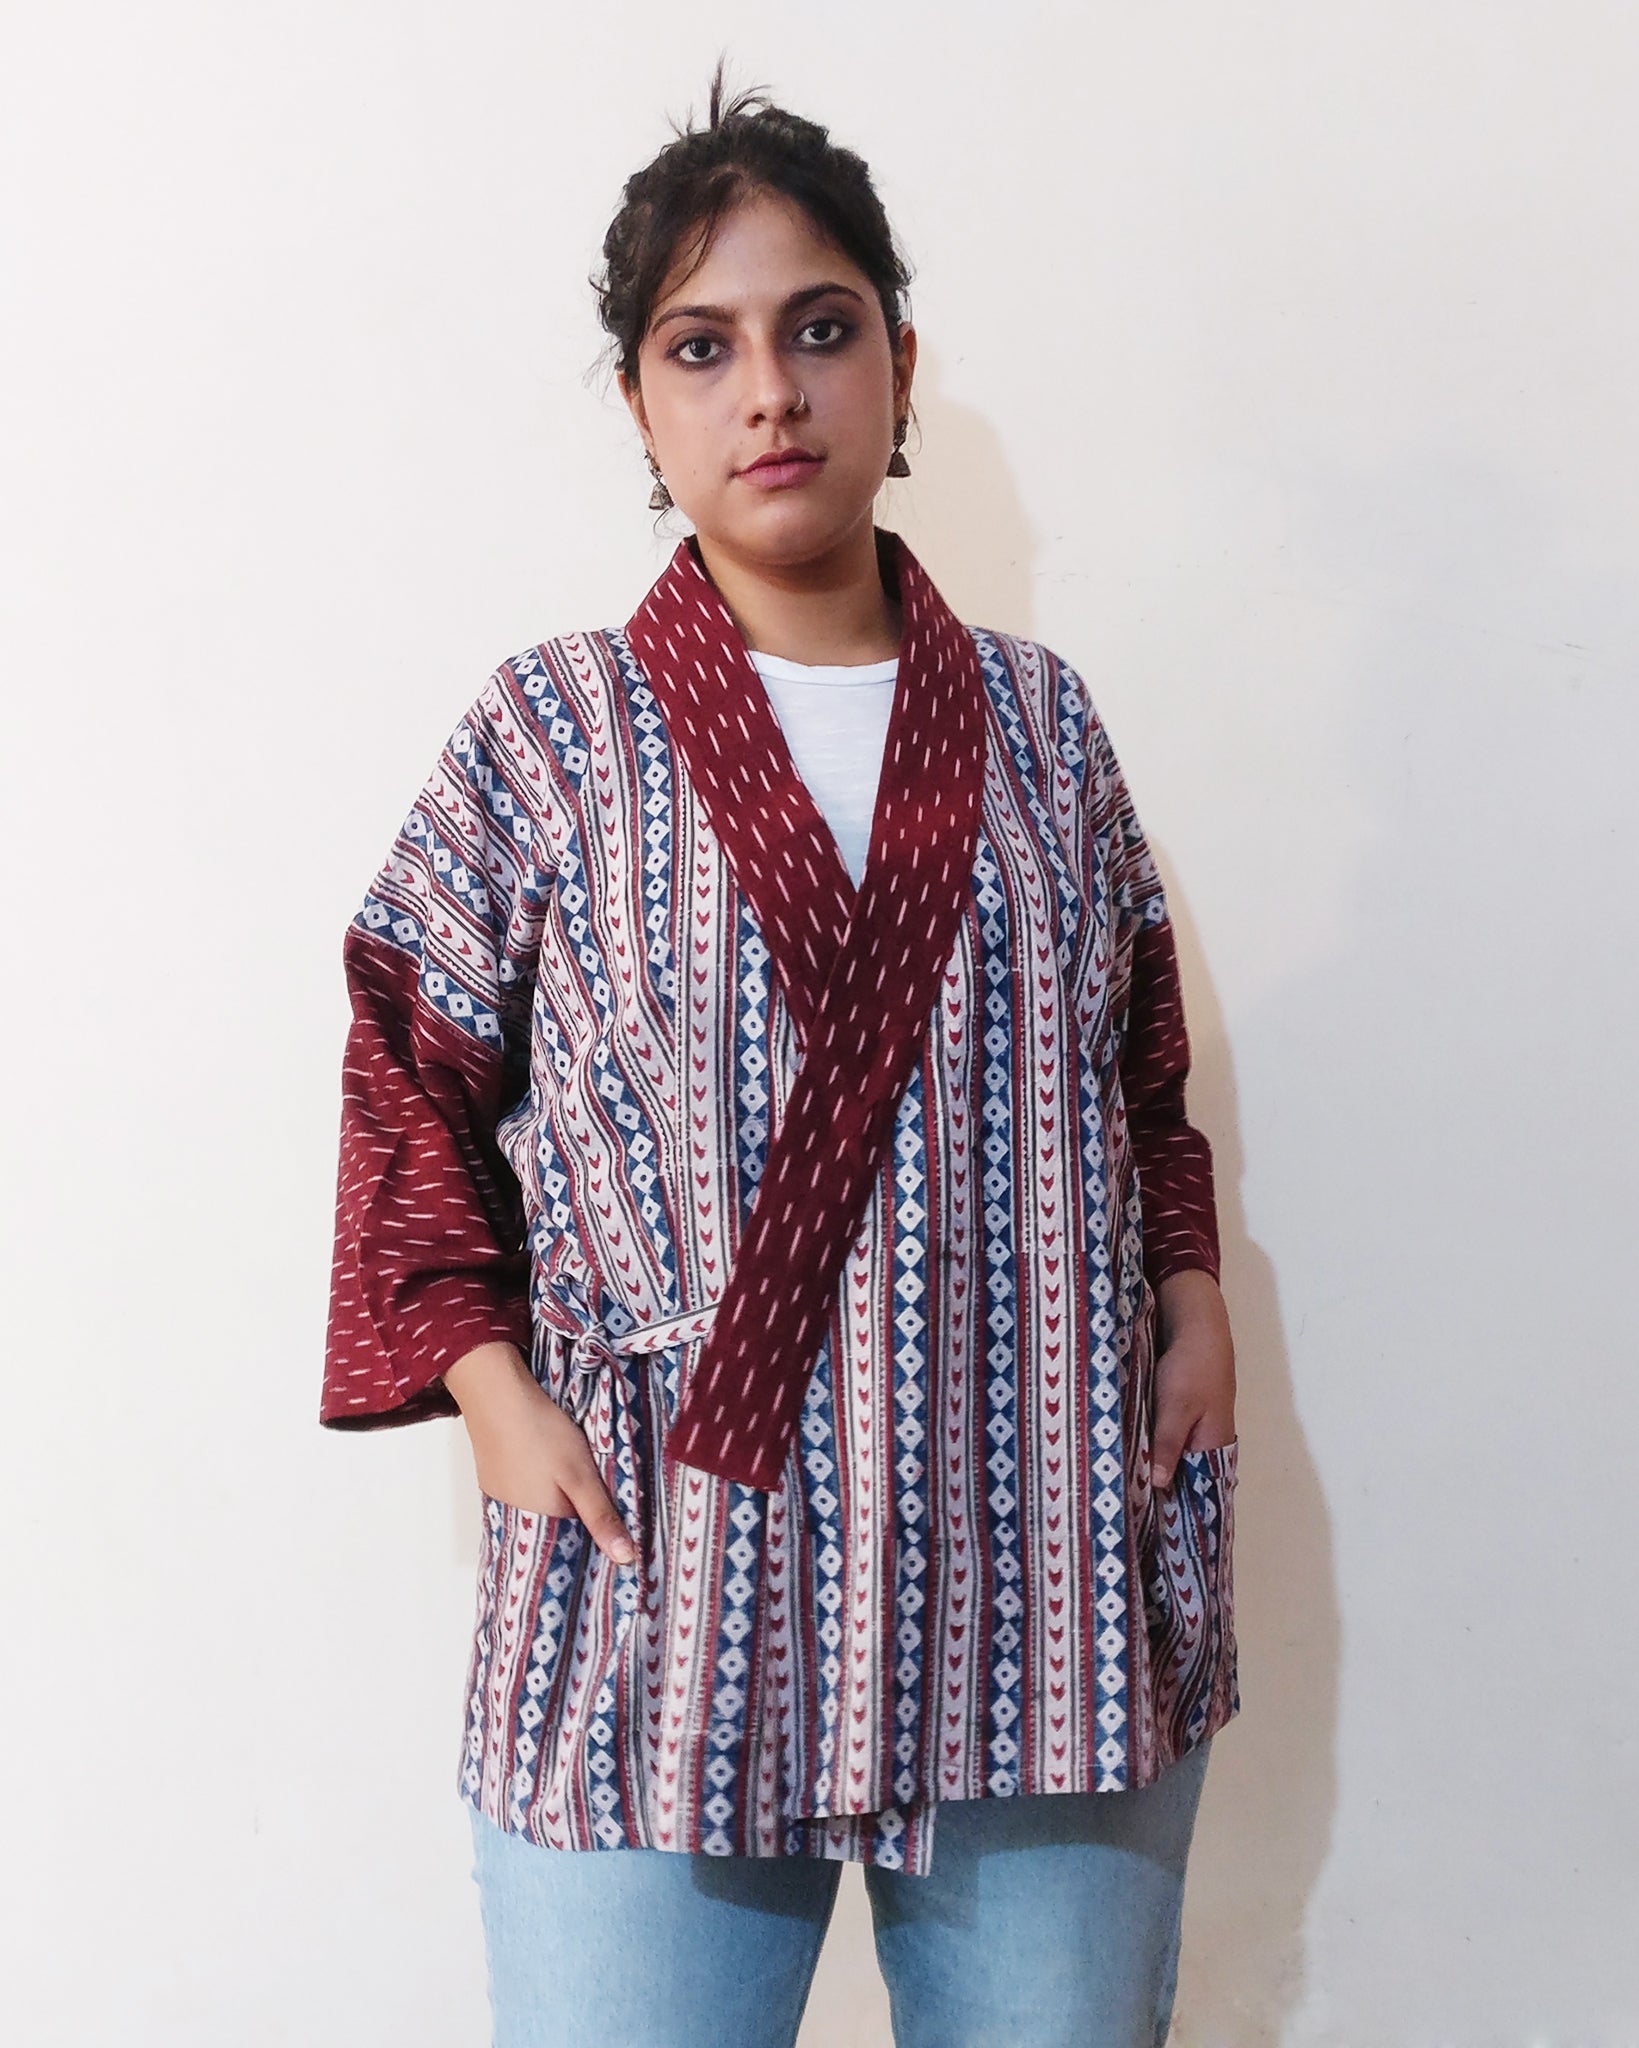 "Jinbei Jacket" is a comfortable adaptation of the casual Kimono, or "Jinbei," typically worn during humid summer in Japan. This Kimono Jacket is made from Indian geometric block print cotton and maroon cotton Ikat. Buy online! Closed